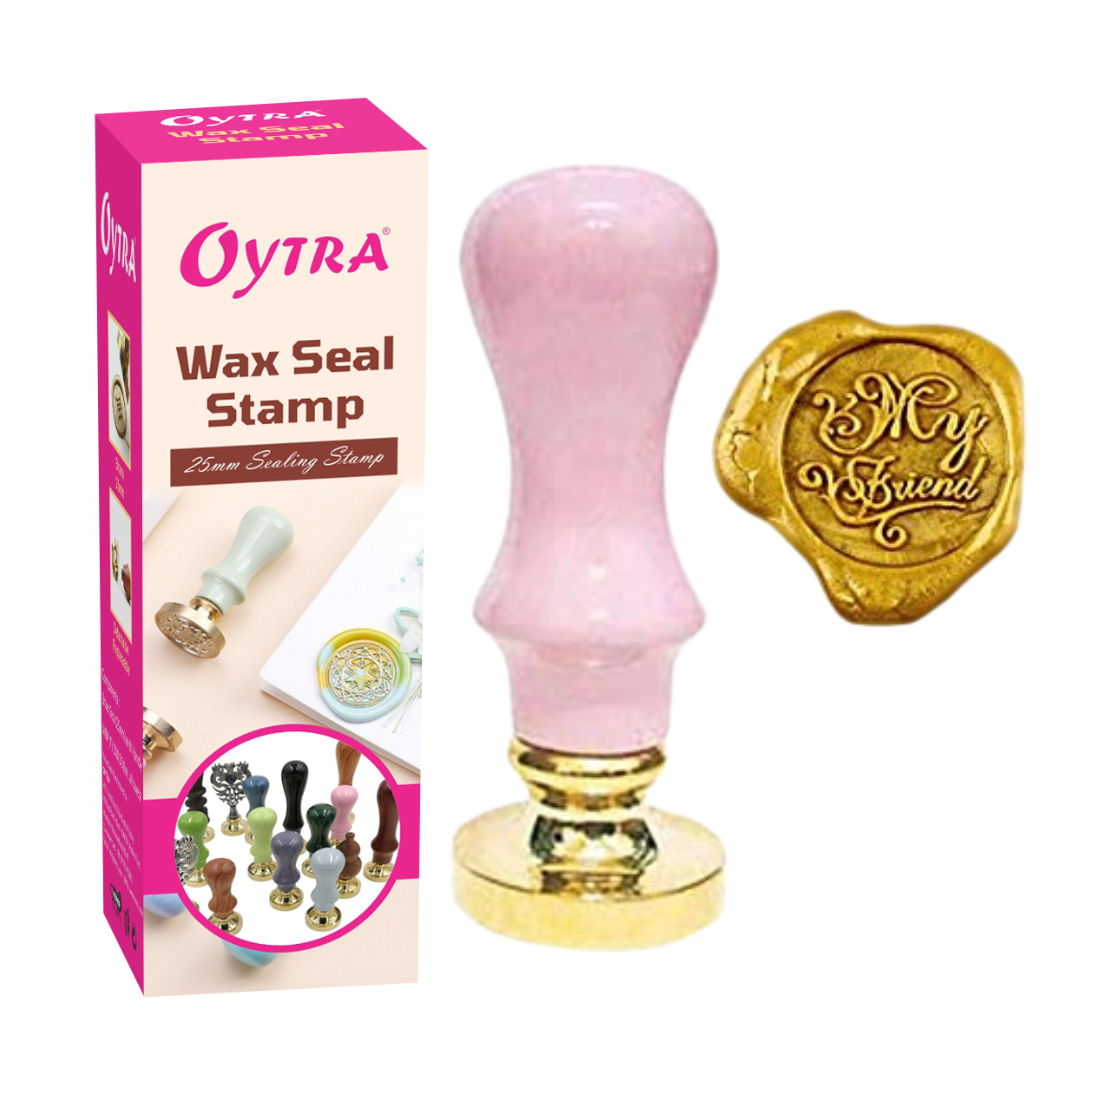 Oytra My Friend Wax Seal Stamp with Removable Brass Handle Great for Greeting Cards, Decoration, Art Craft, Scrapbooking, Gifting